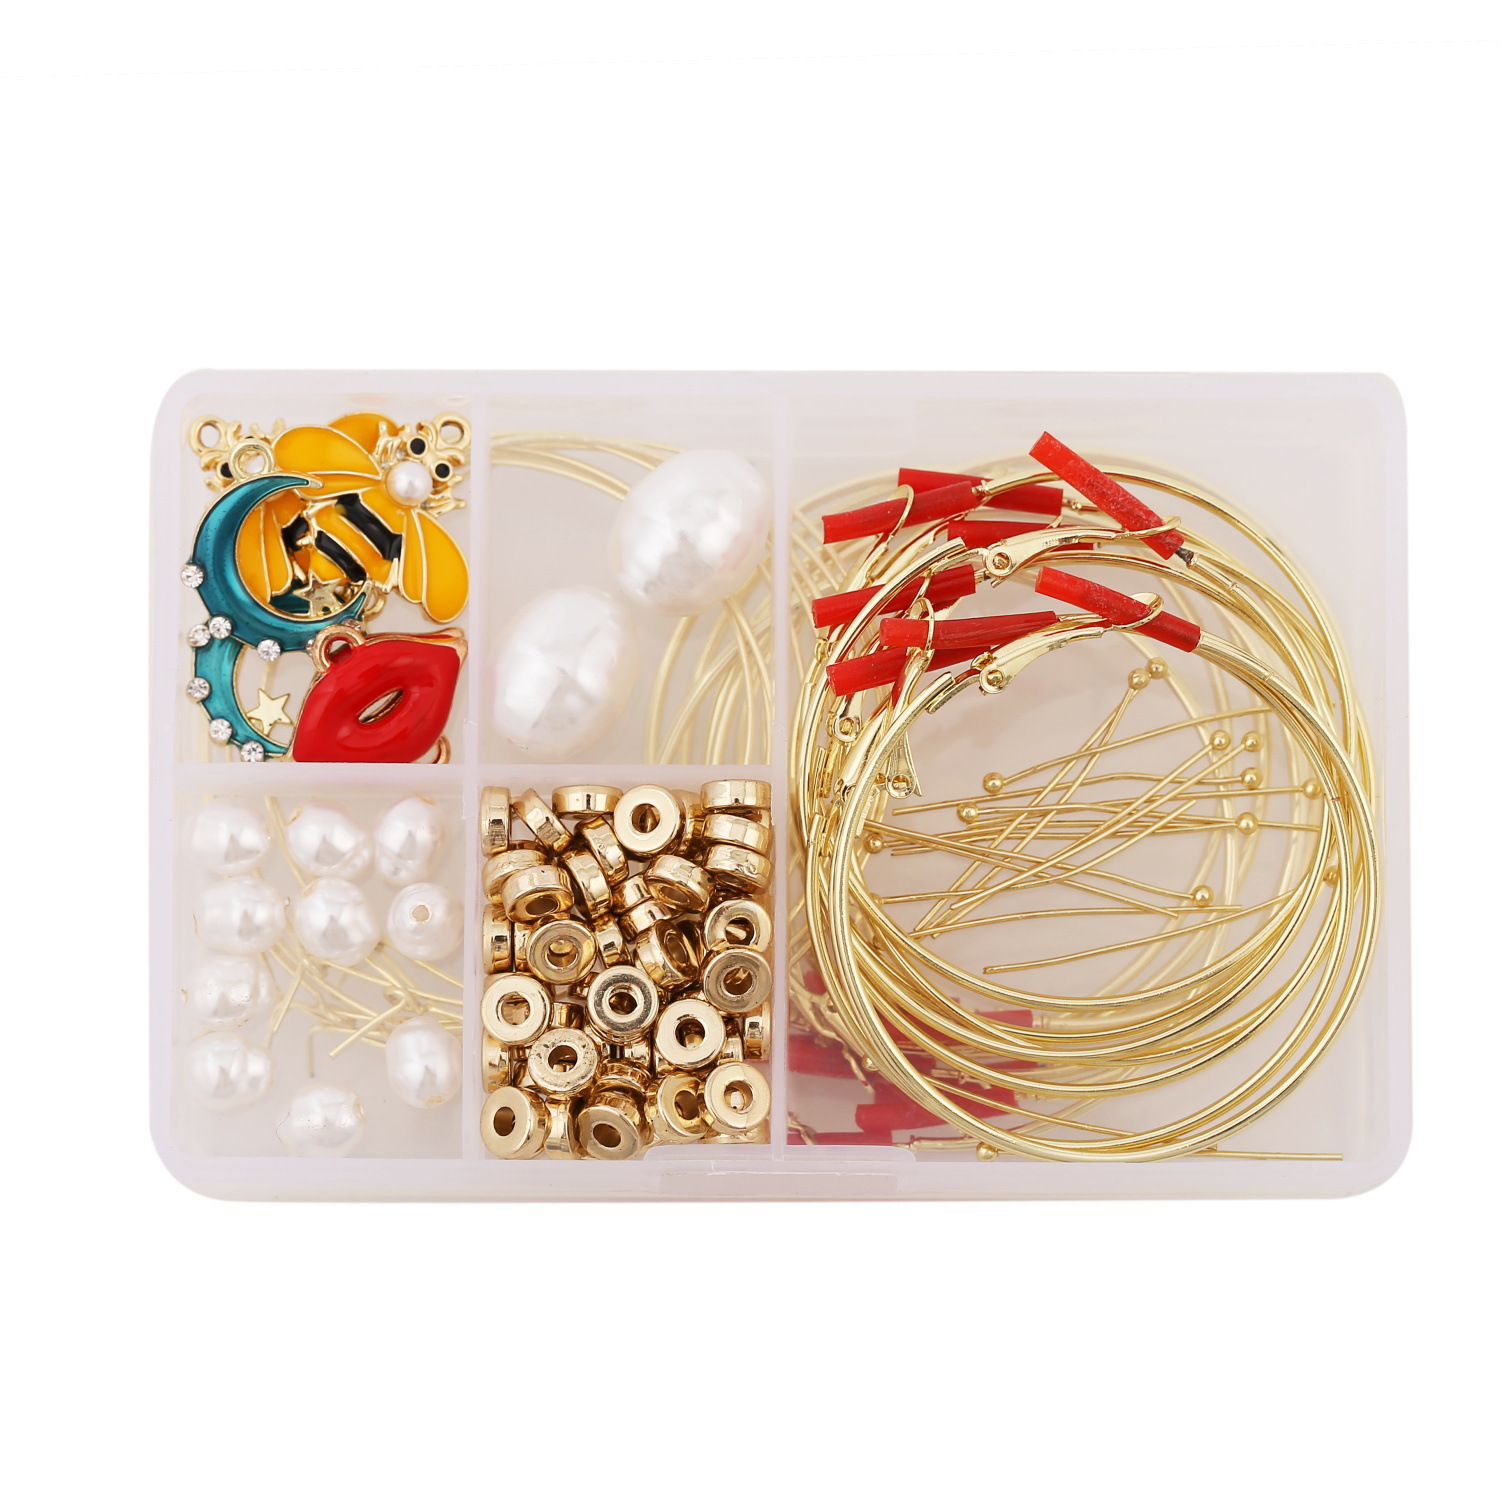 2:earring accessories box